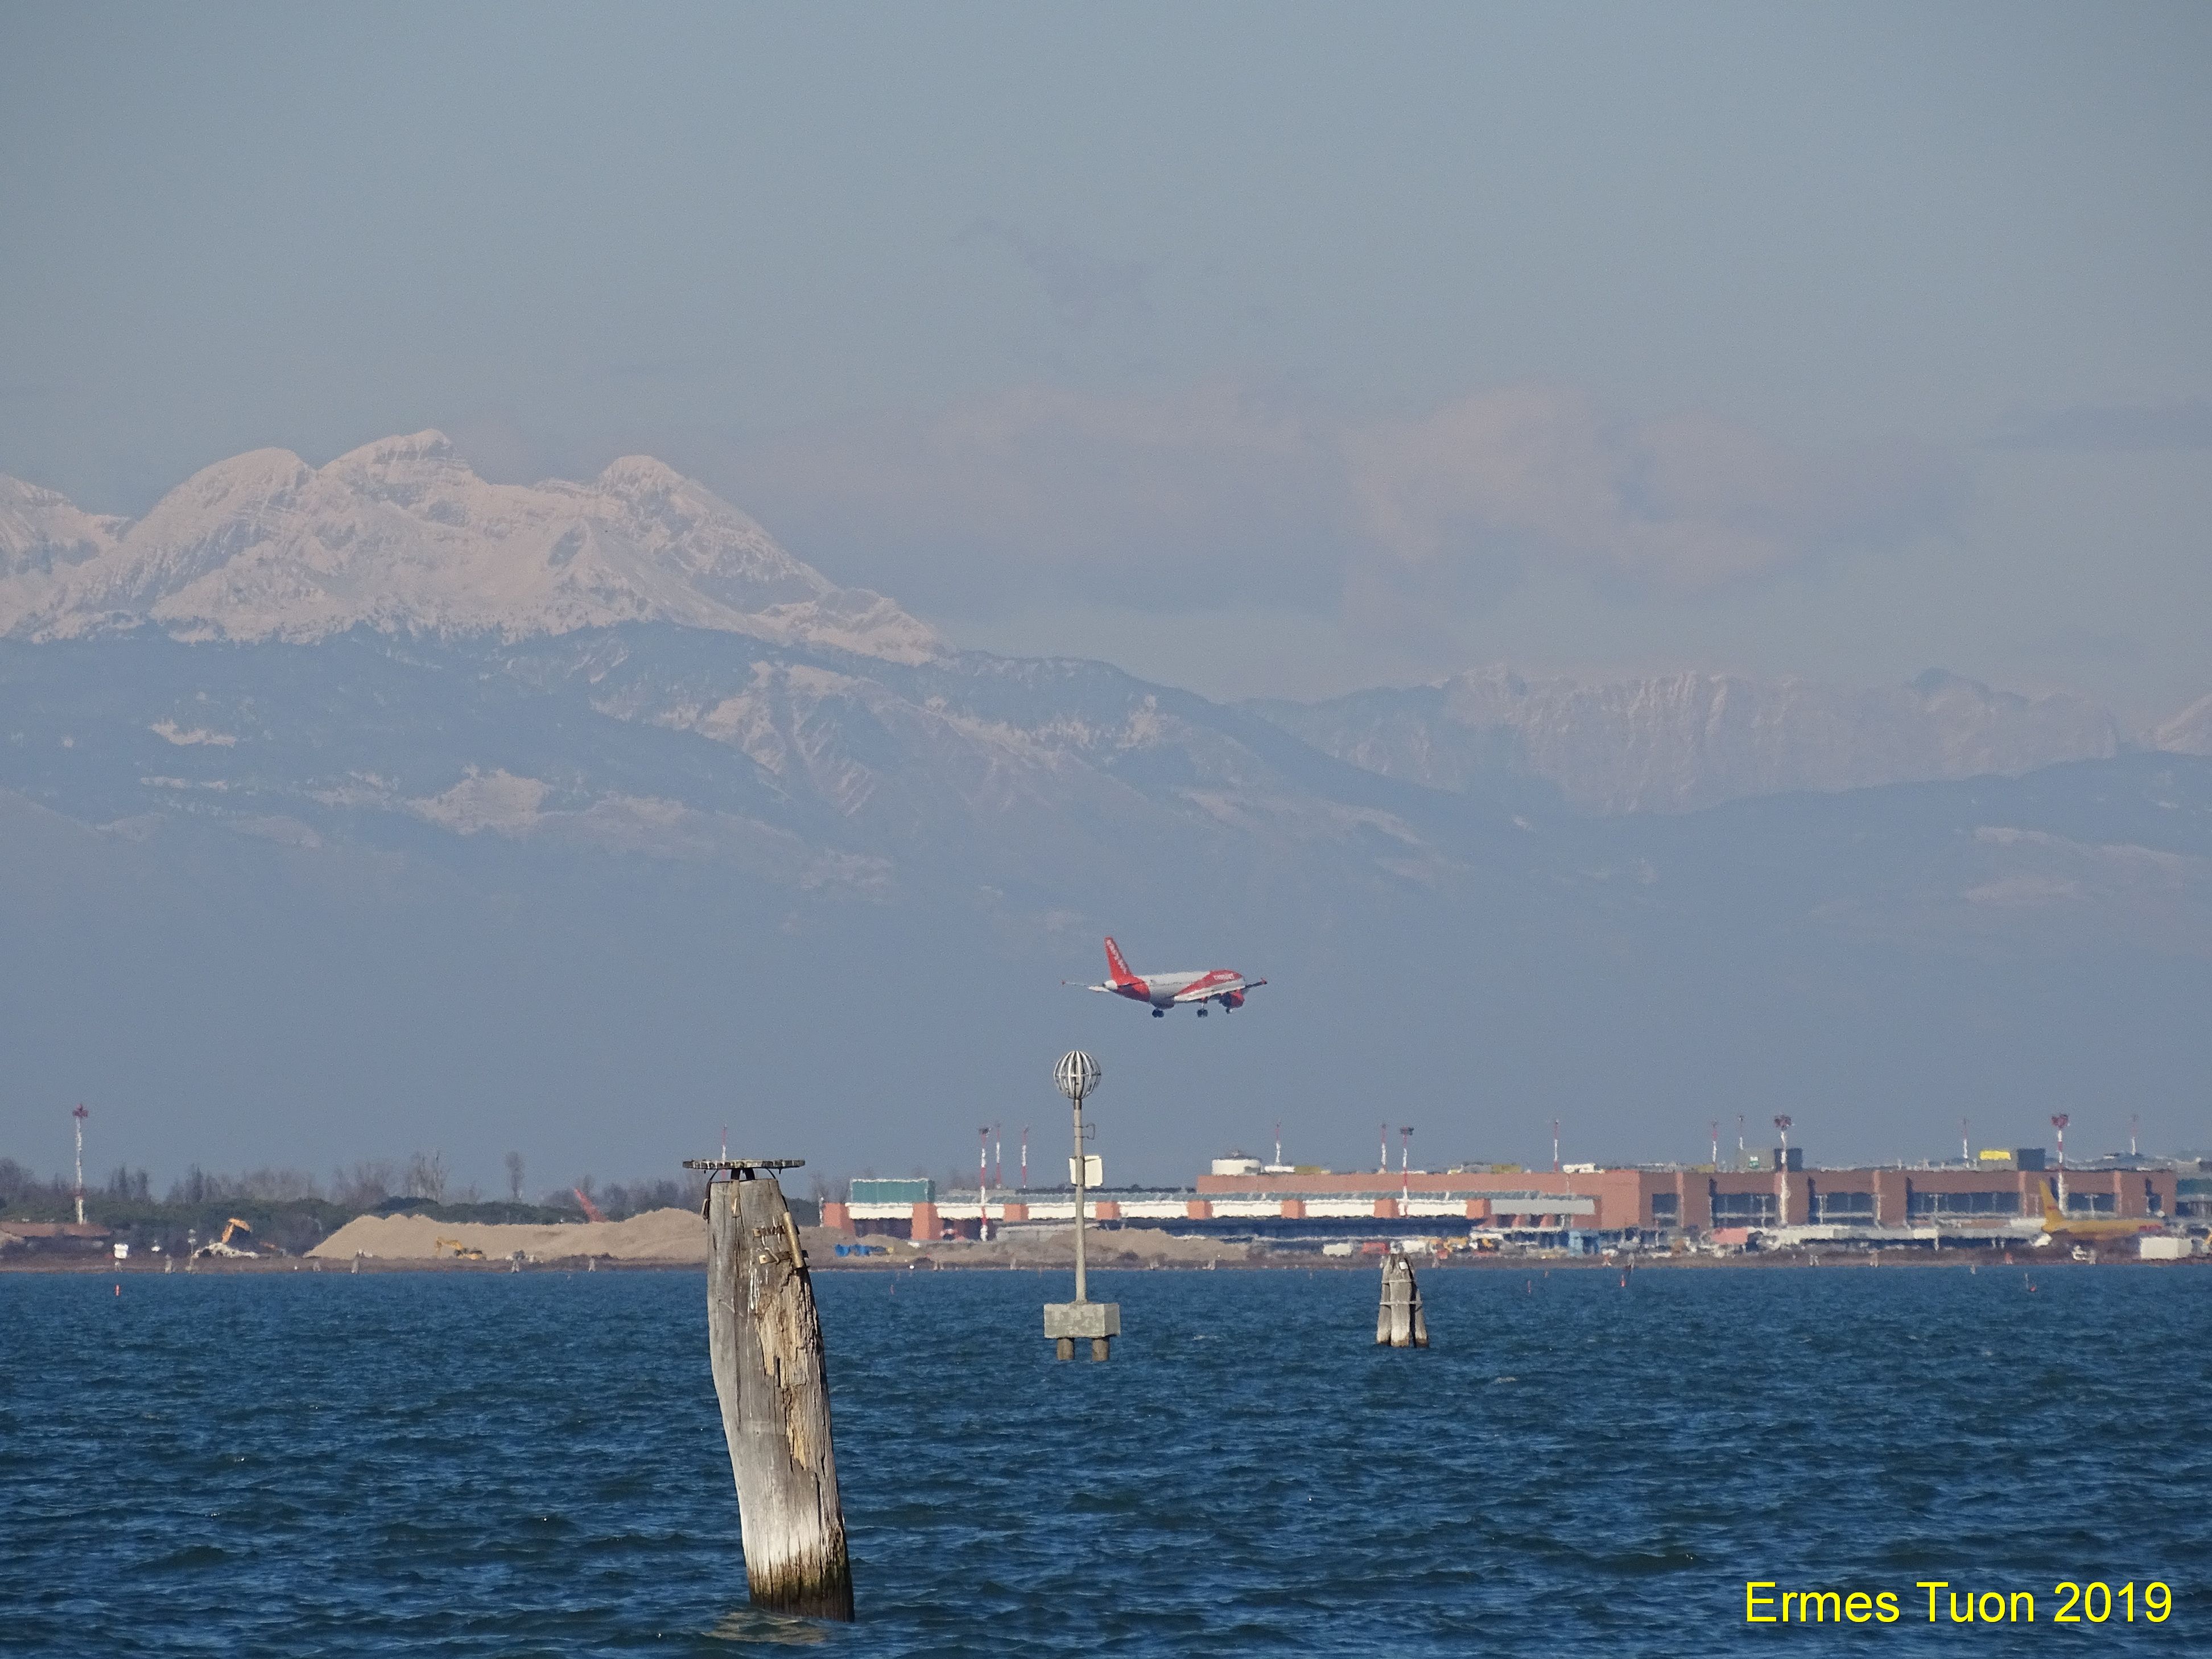 Caption: A flight is landing to VCE Airport, in a view from Venice - in the background you can see the Dolomites Mountain - Local Guide @ermest